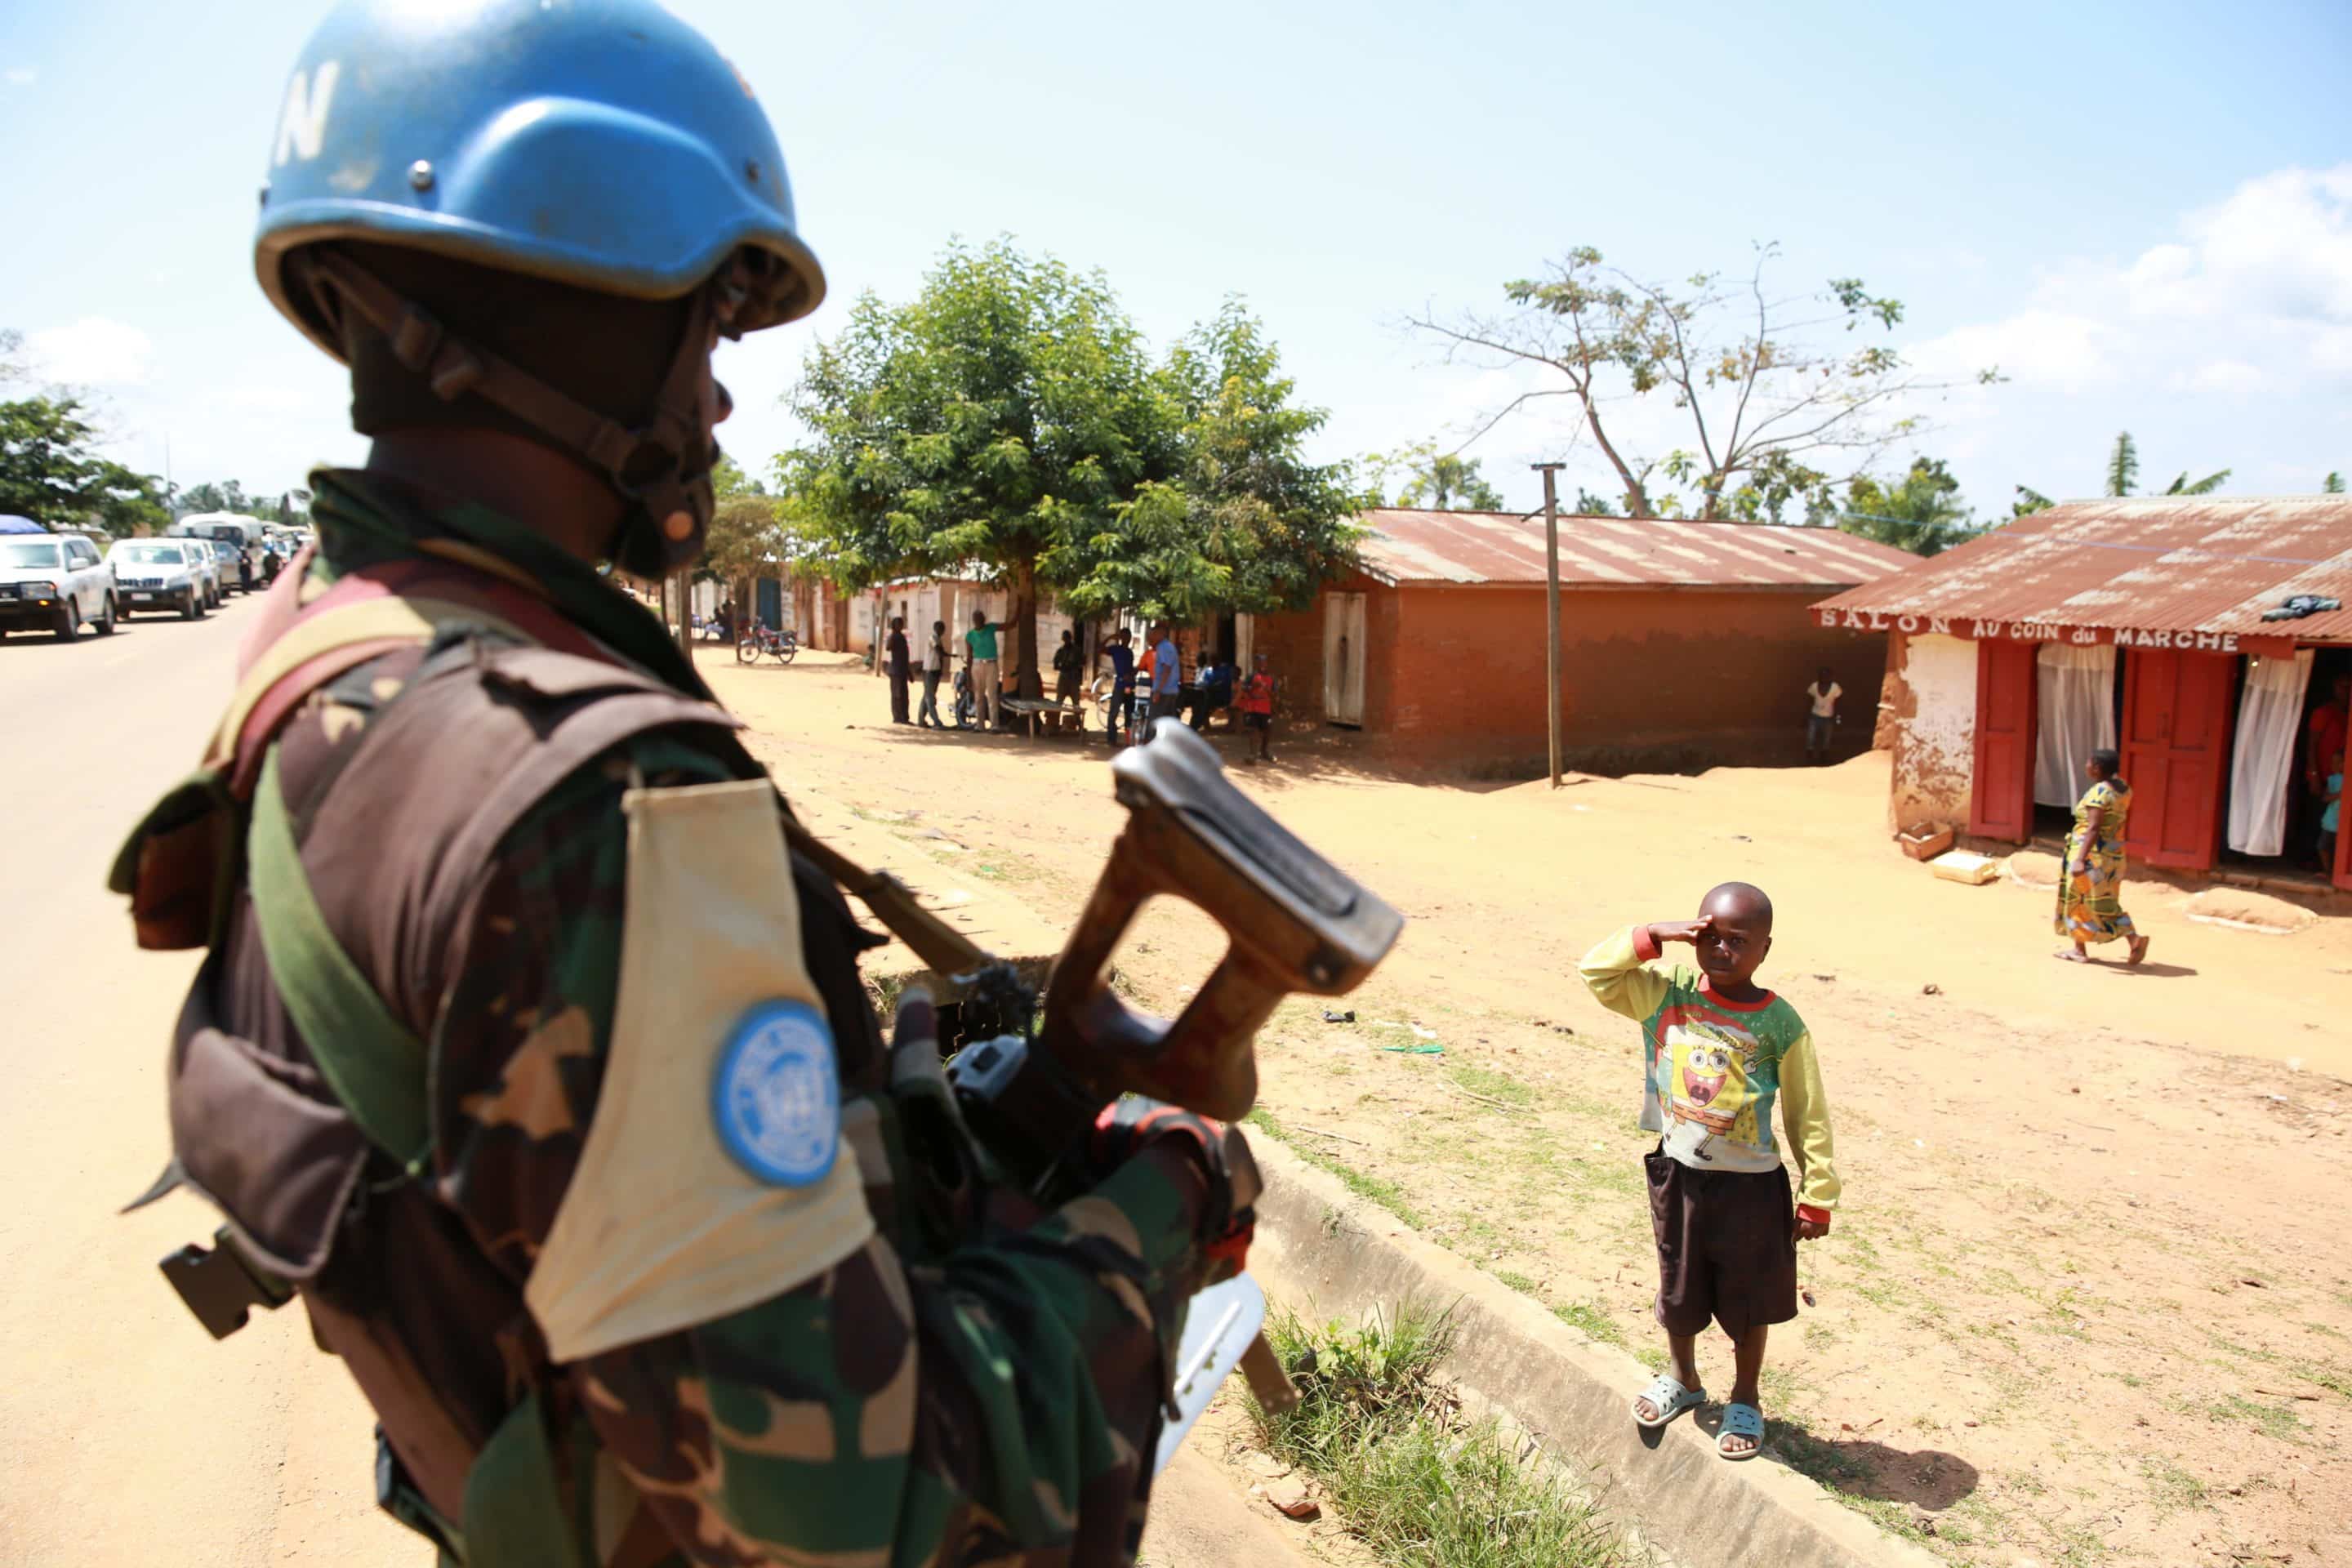 New Report Details Massive Sexual Abuse in the Congo By UN Peacekeepers